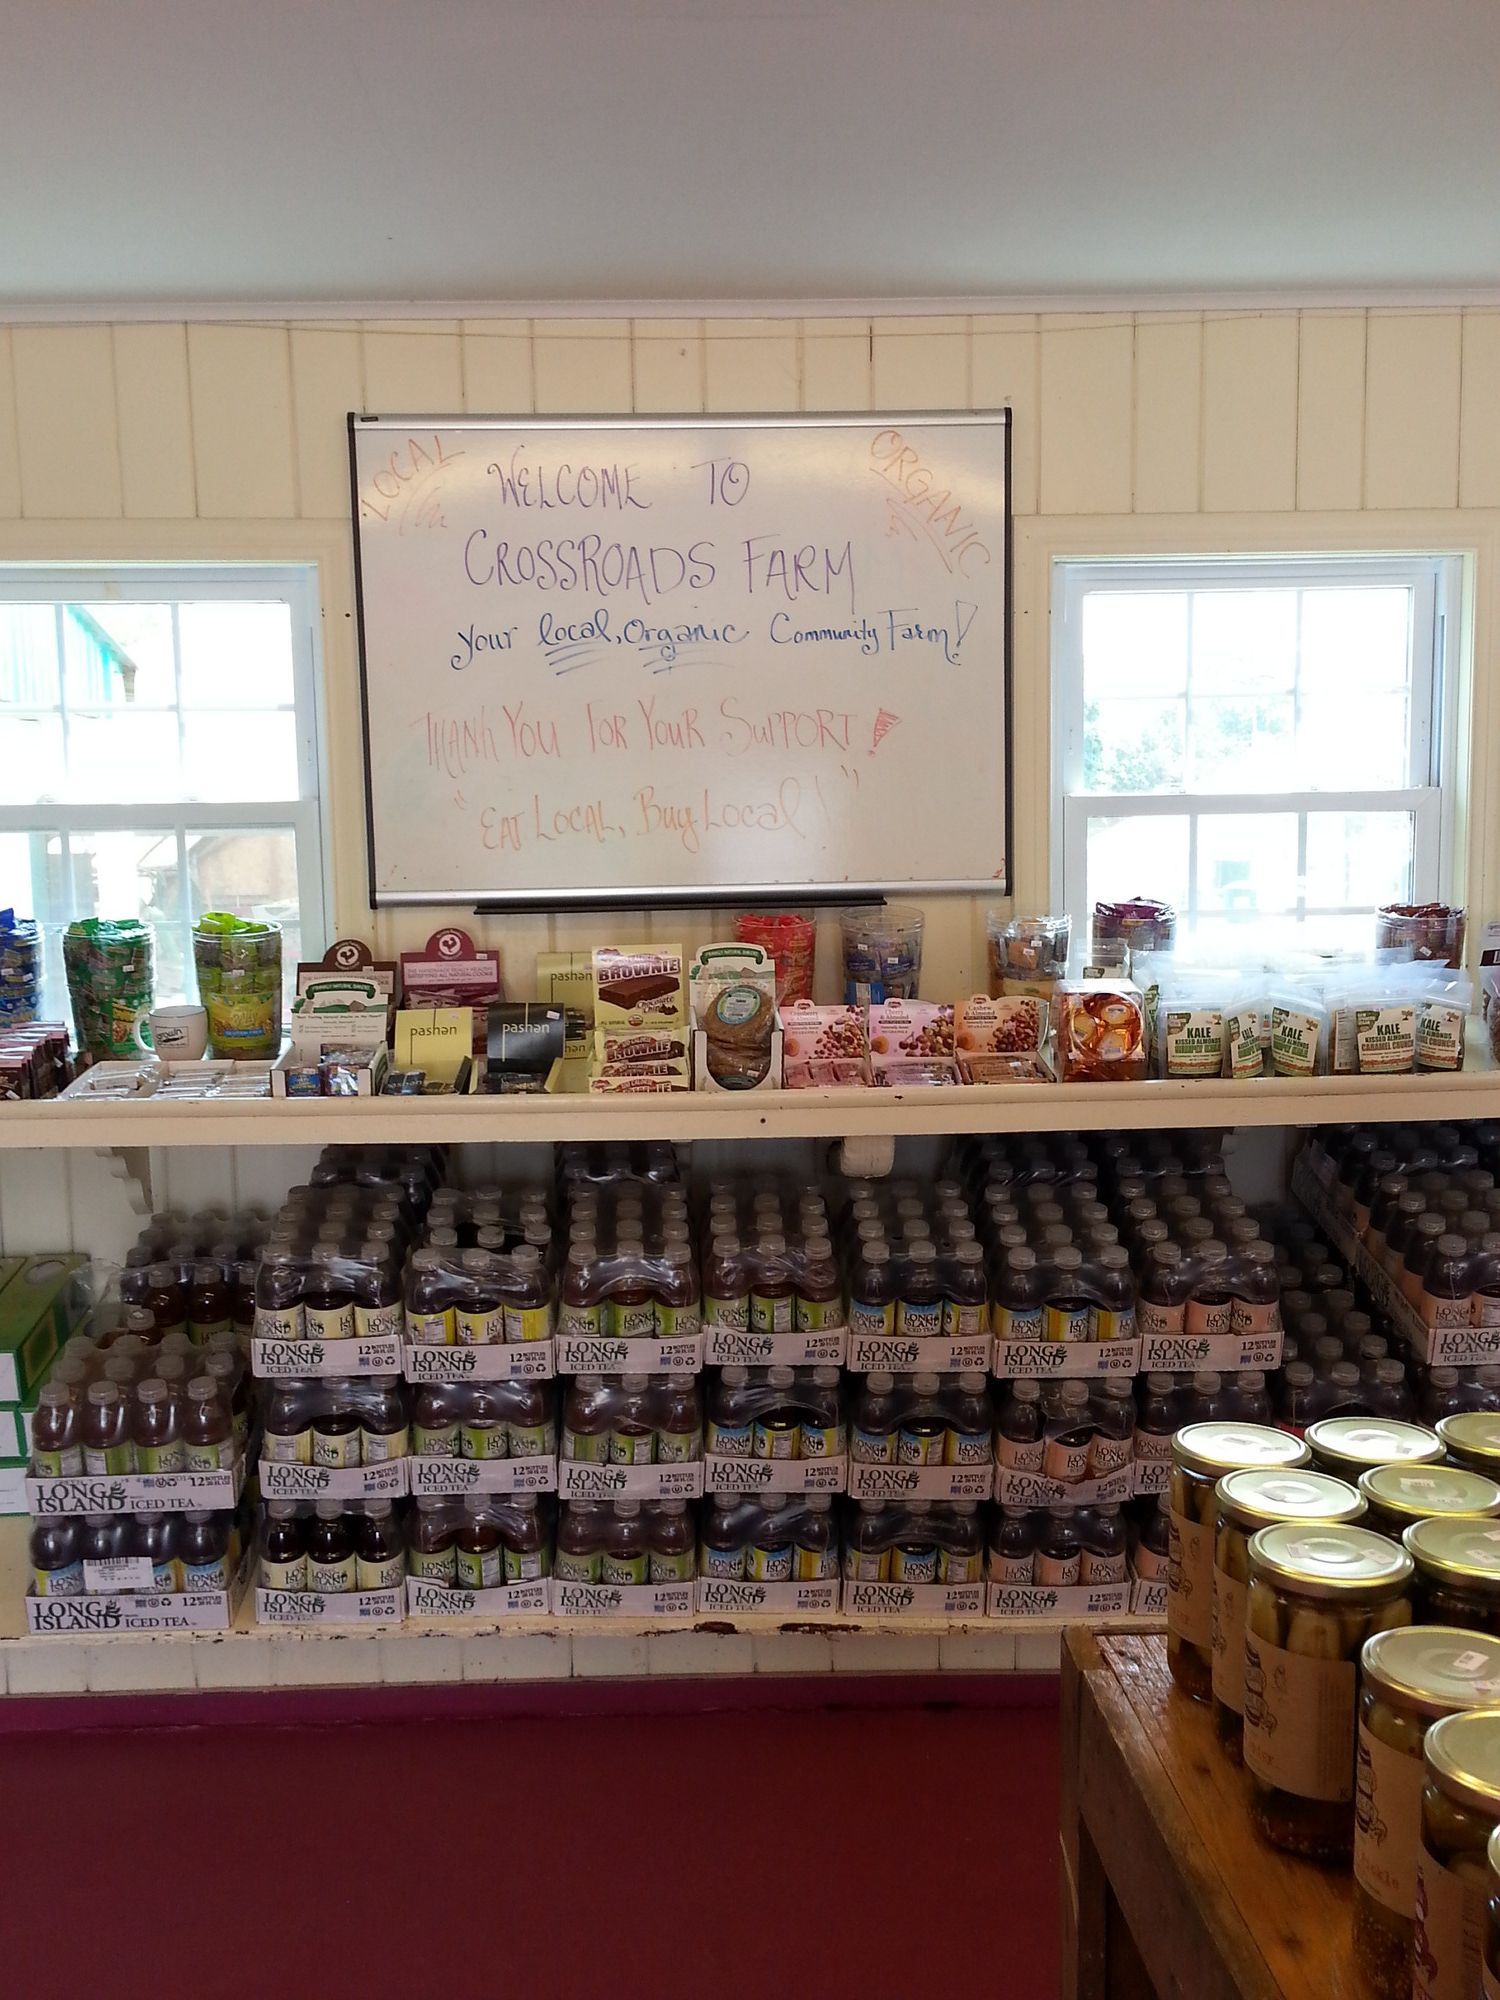 The farm stand at Crossroads offered a variety of organic health foods and baked goods, including organic nuts, dried fruits, trail mixes, brownies, cakes and cookies, fruit spreads and jars of honey from its resident beehive.